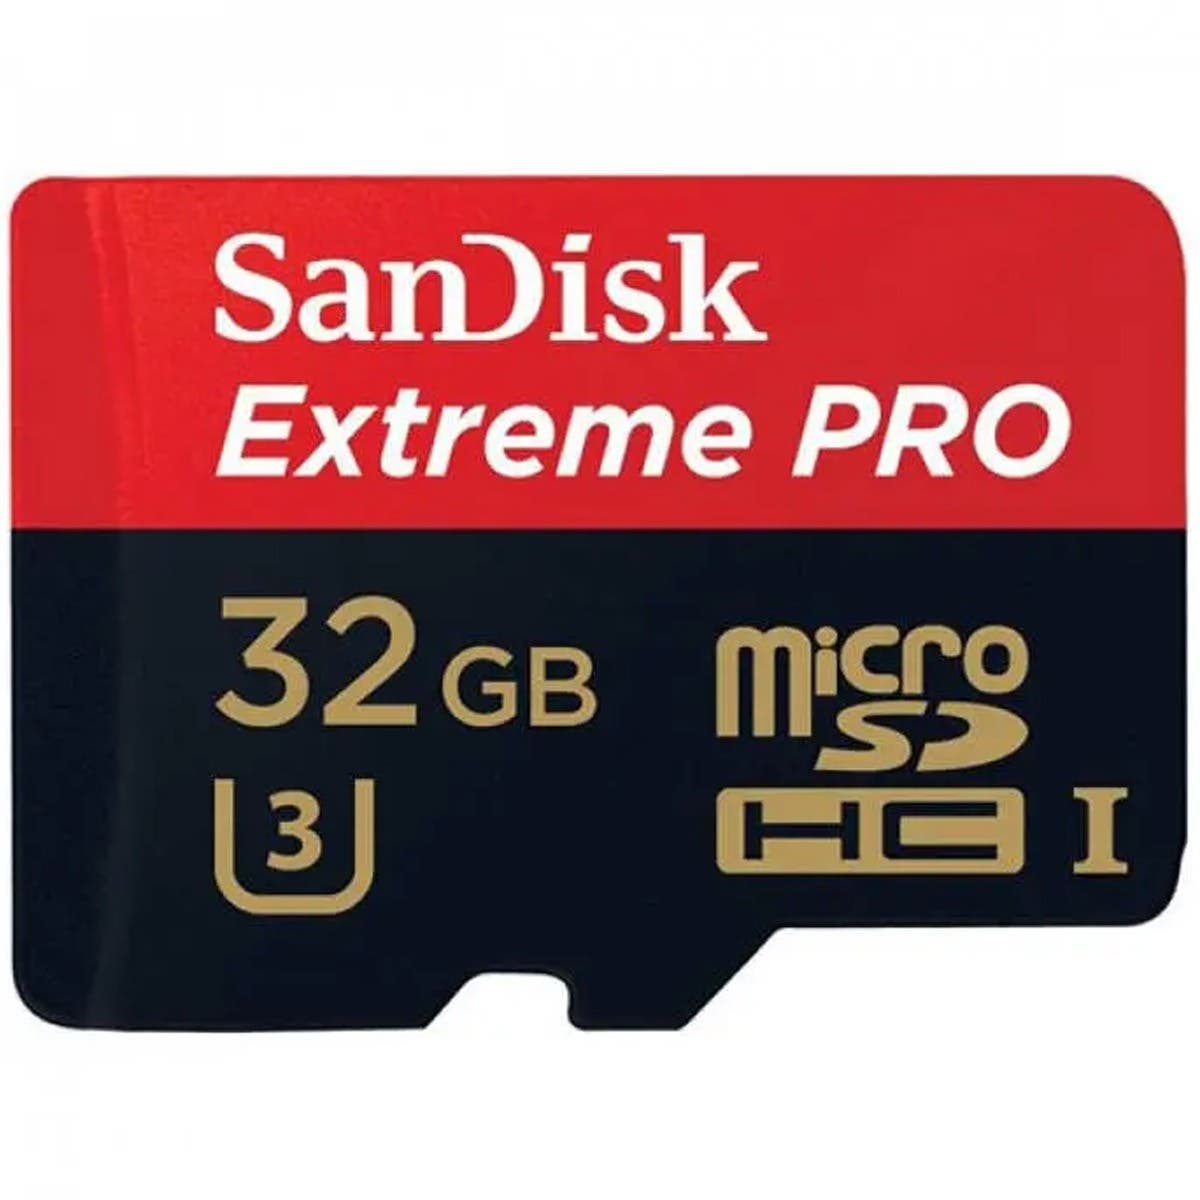 SanDisk 32GB Extreme Pro microSDHC UHS-I Card with SD Adapter